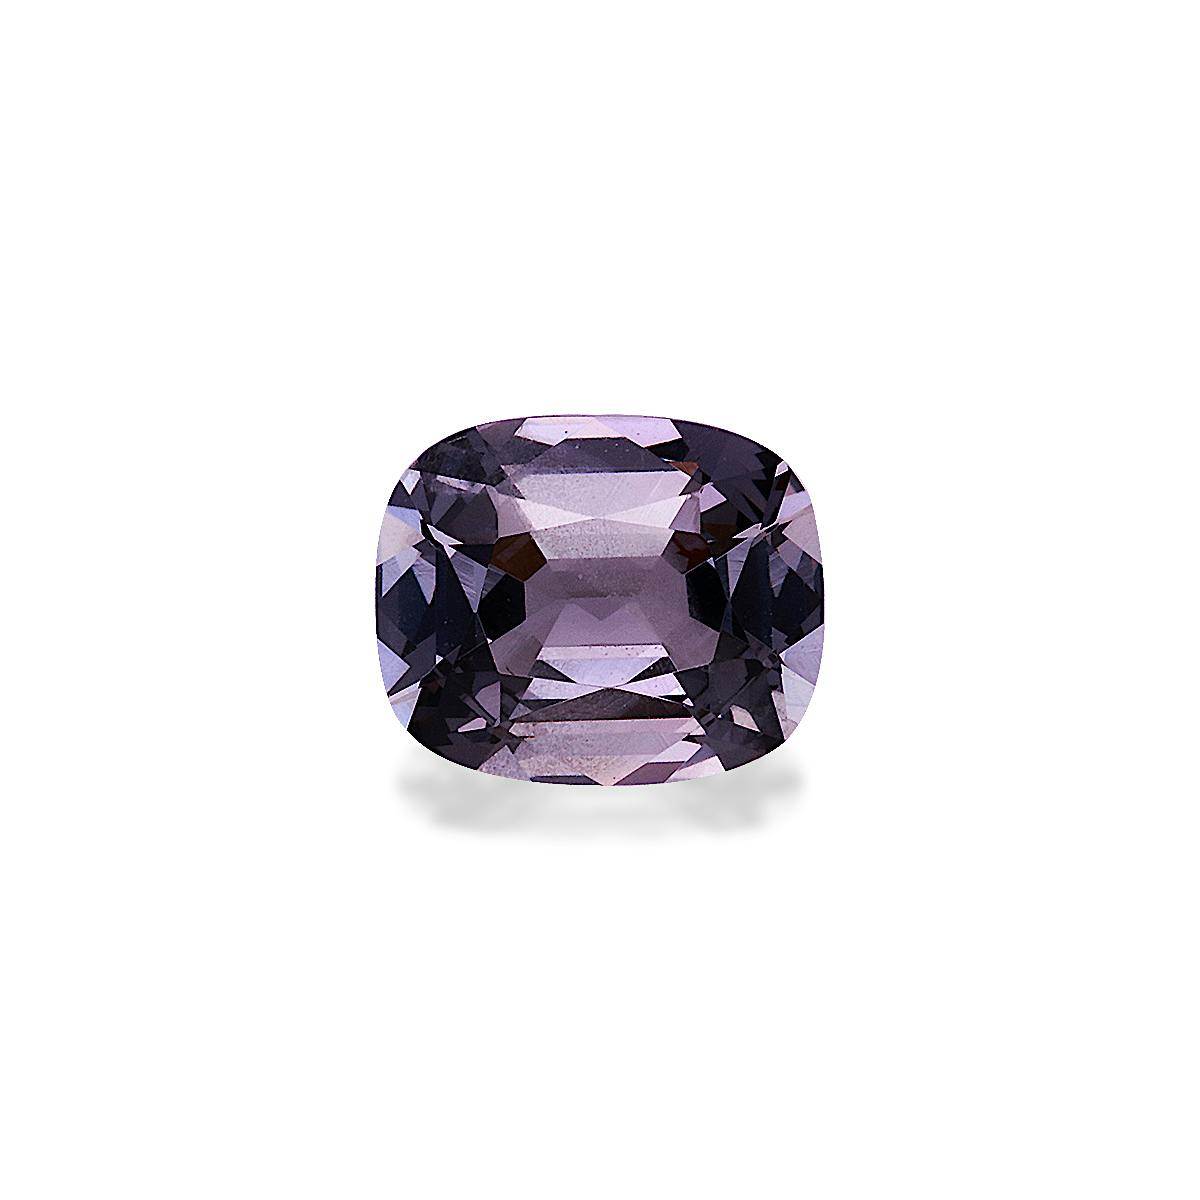 Grey Spinel 1.28ct - Main Image